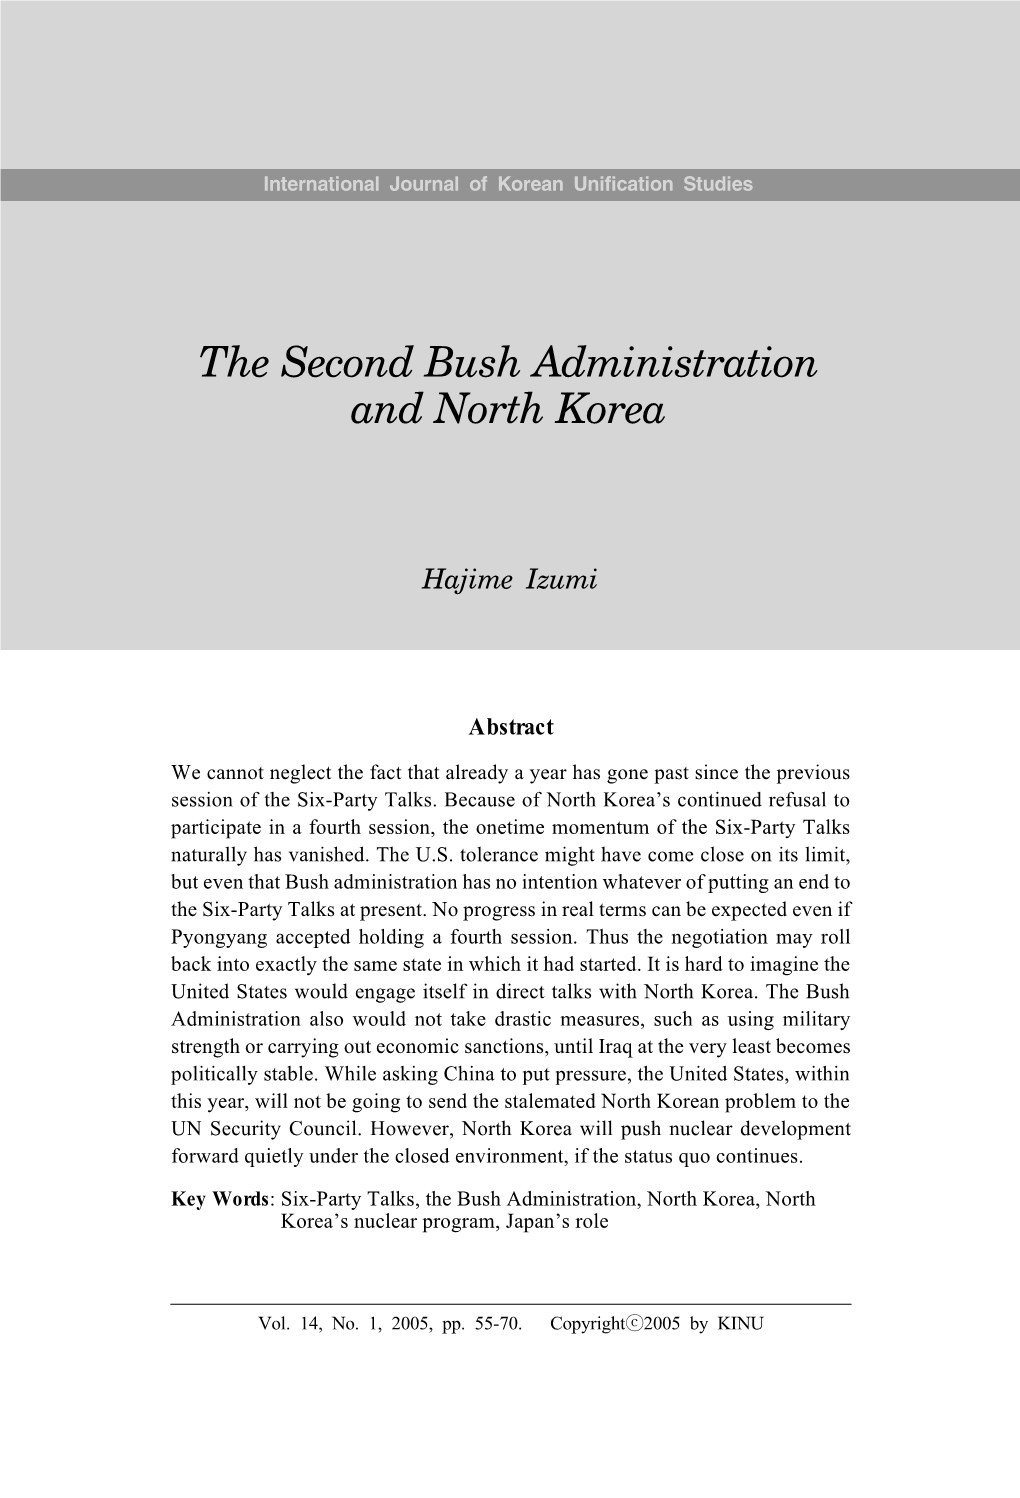 The Second Bush Administration and North Korea